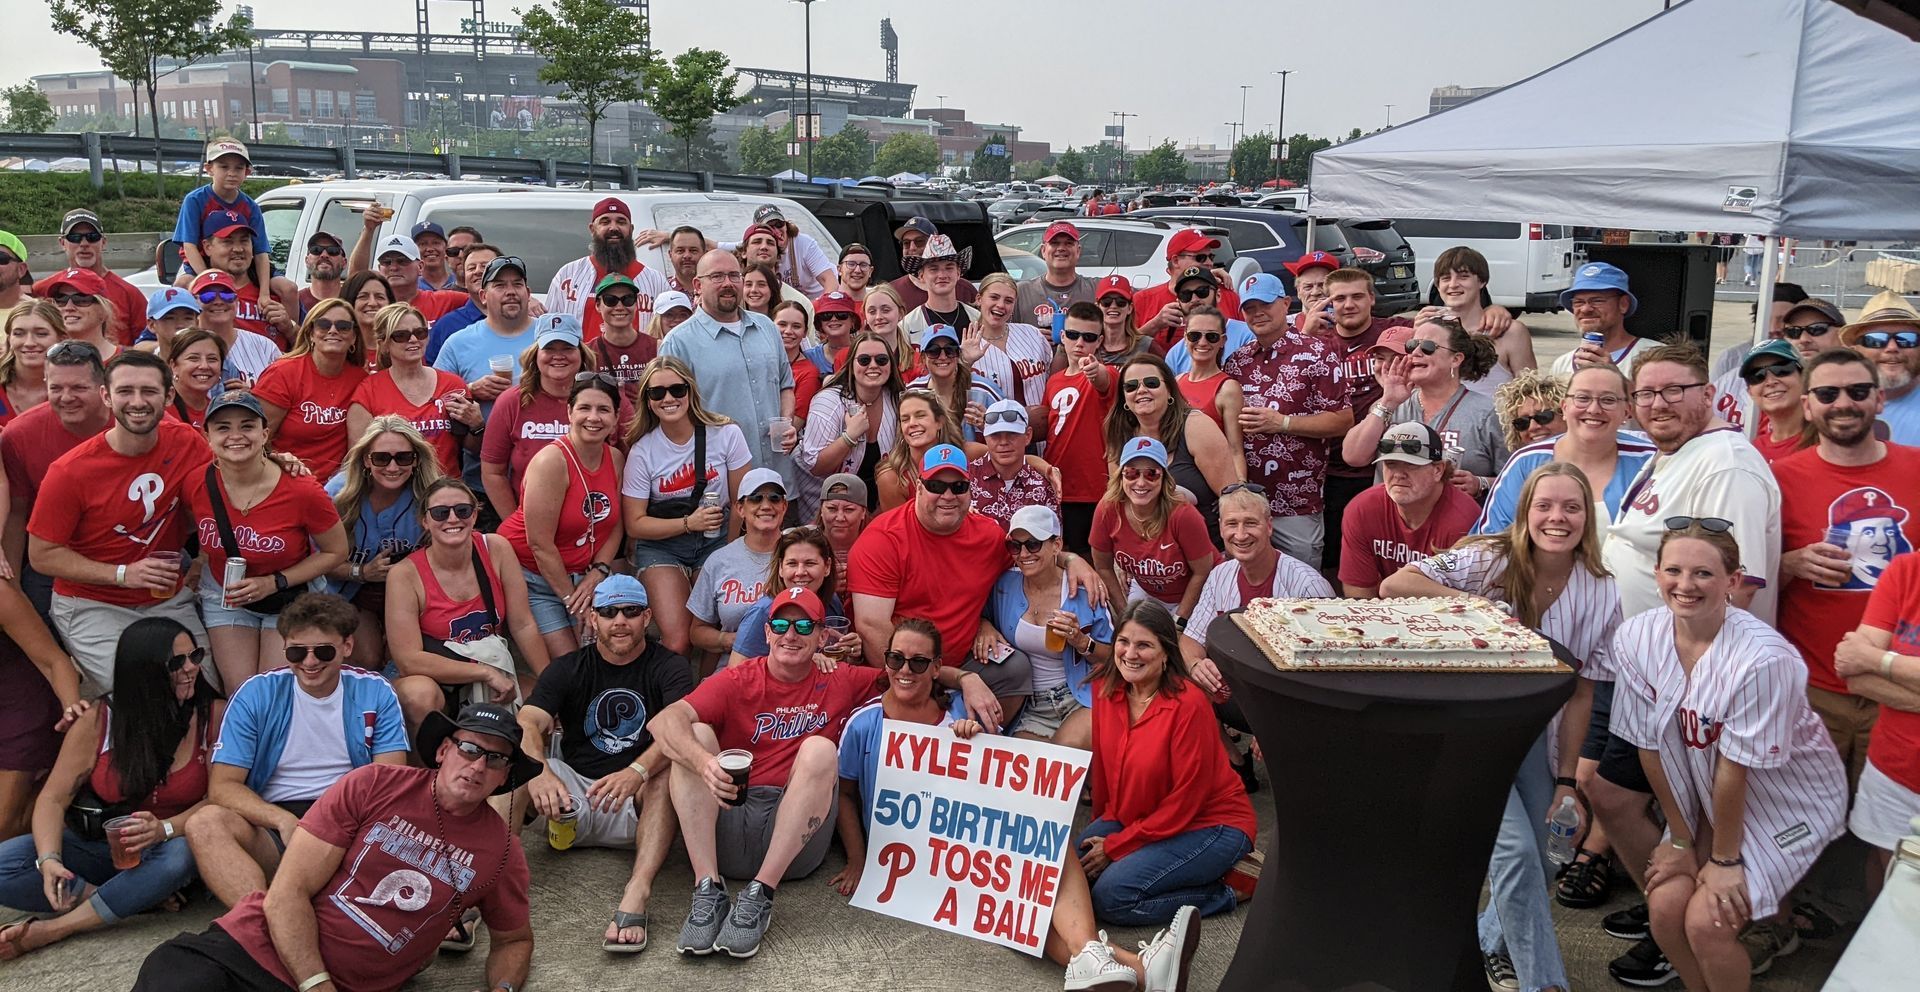 Philly Tailgate for Phillies Baseball with TAPT